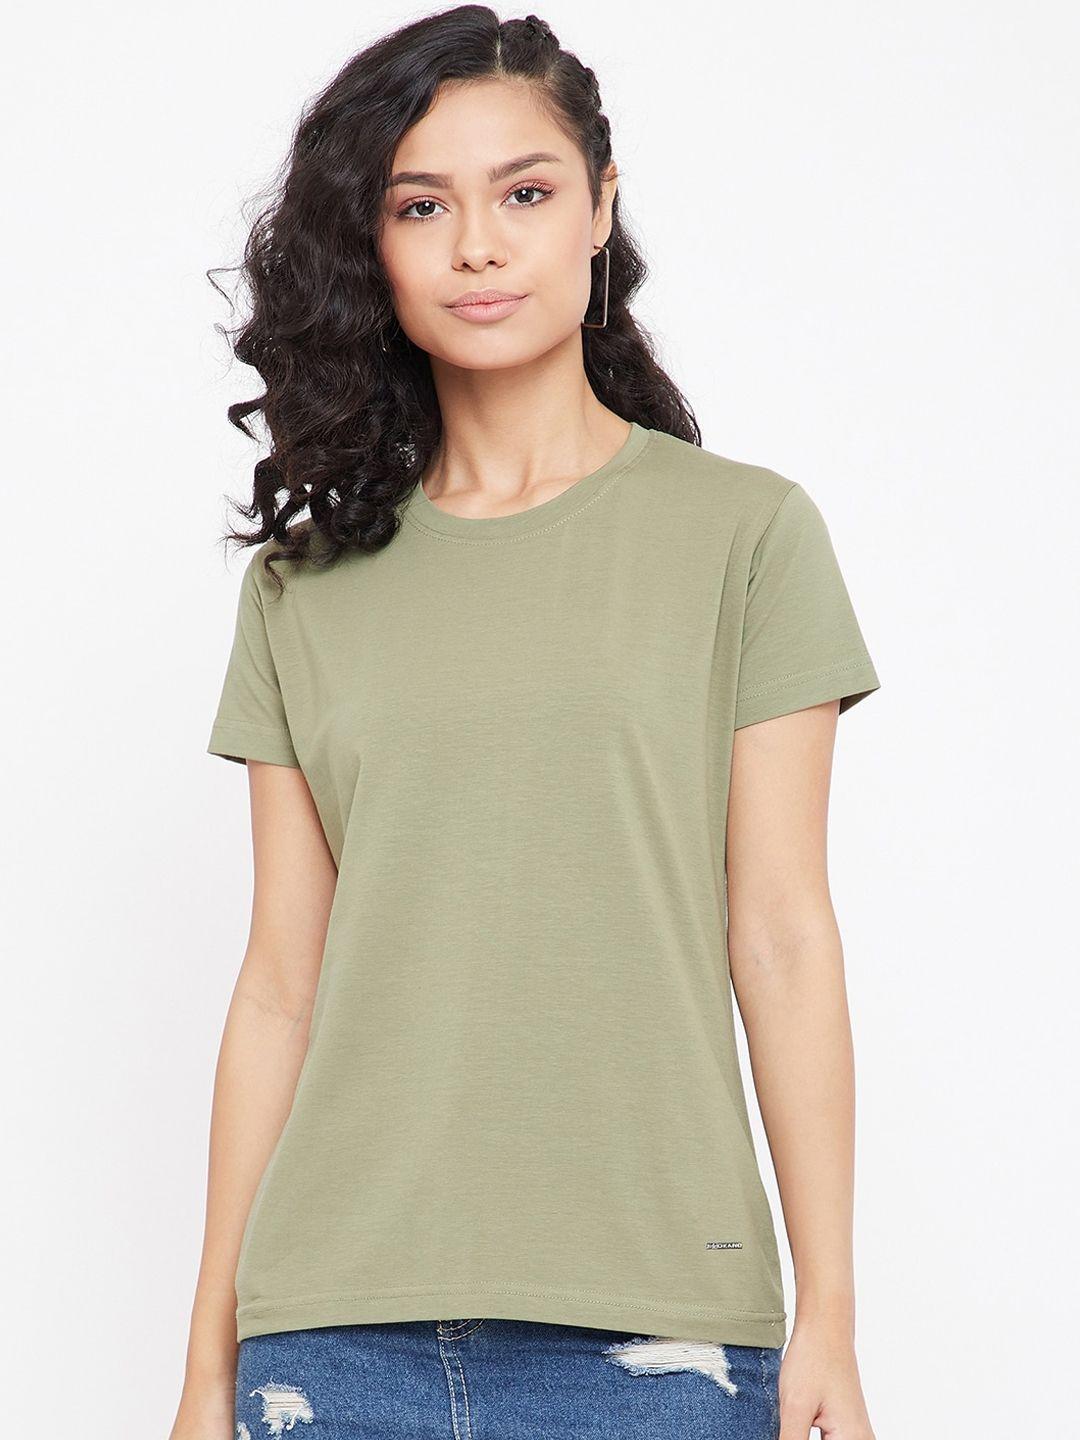 okane women olive green solid round neck t-shirt